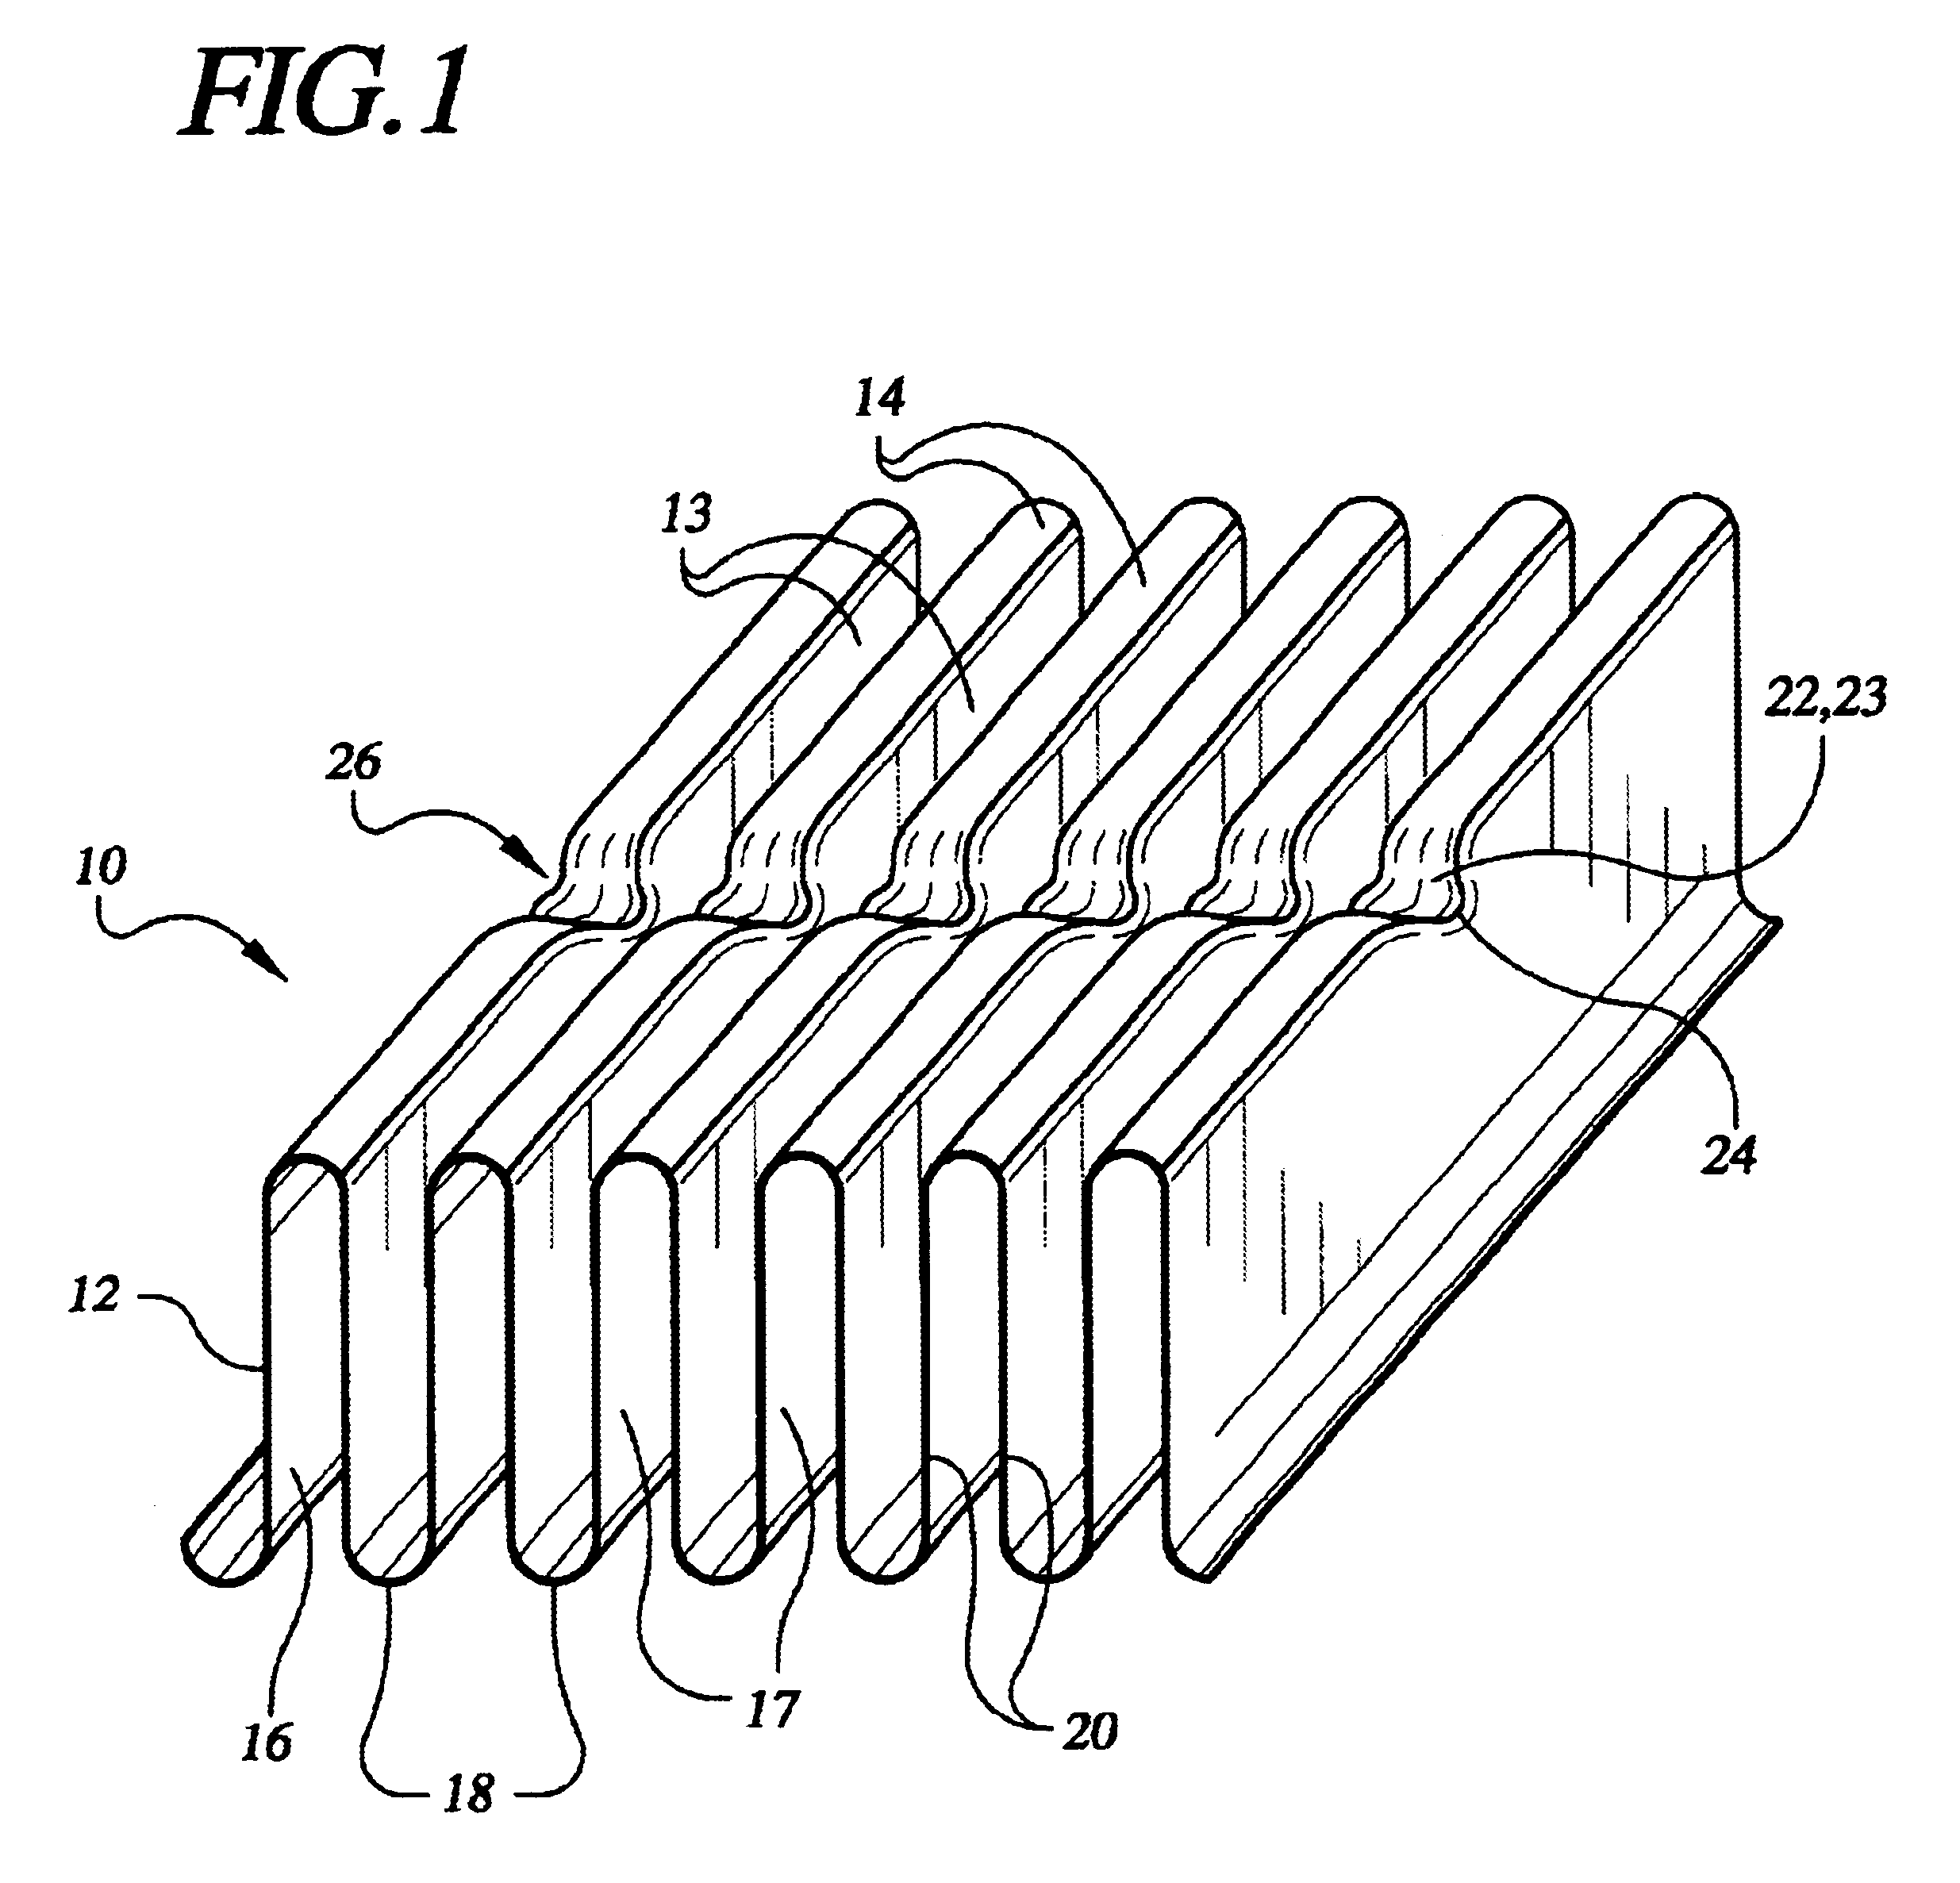 Corrugated fin heat exchanger and method of manufacture